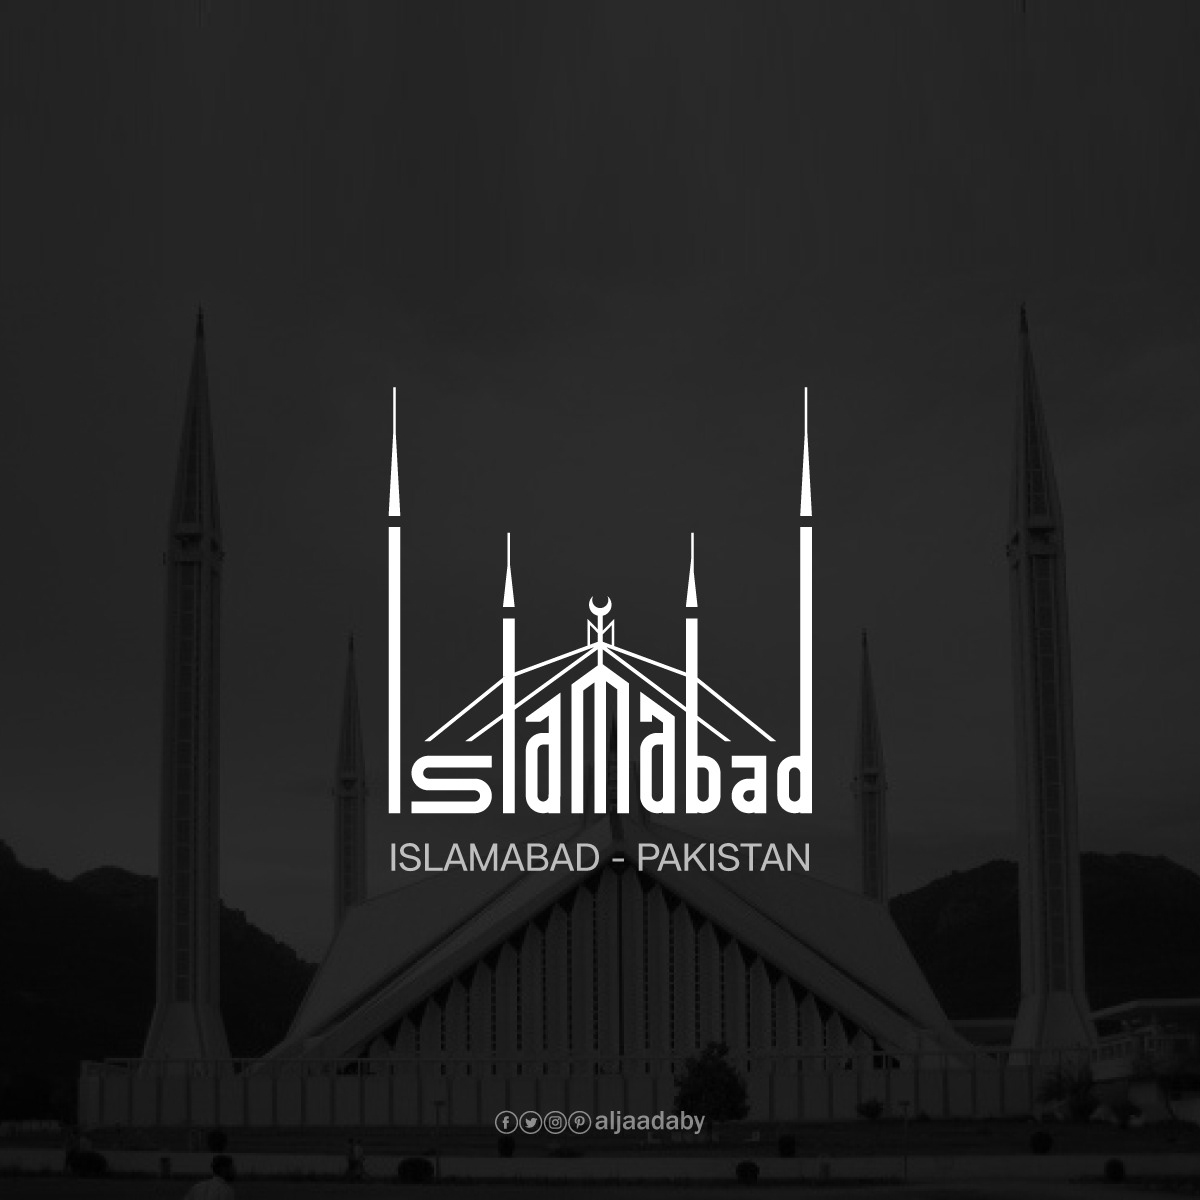 Typographic city logos based on their famous landmarks - Islamabad